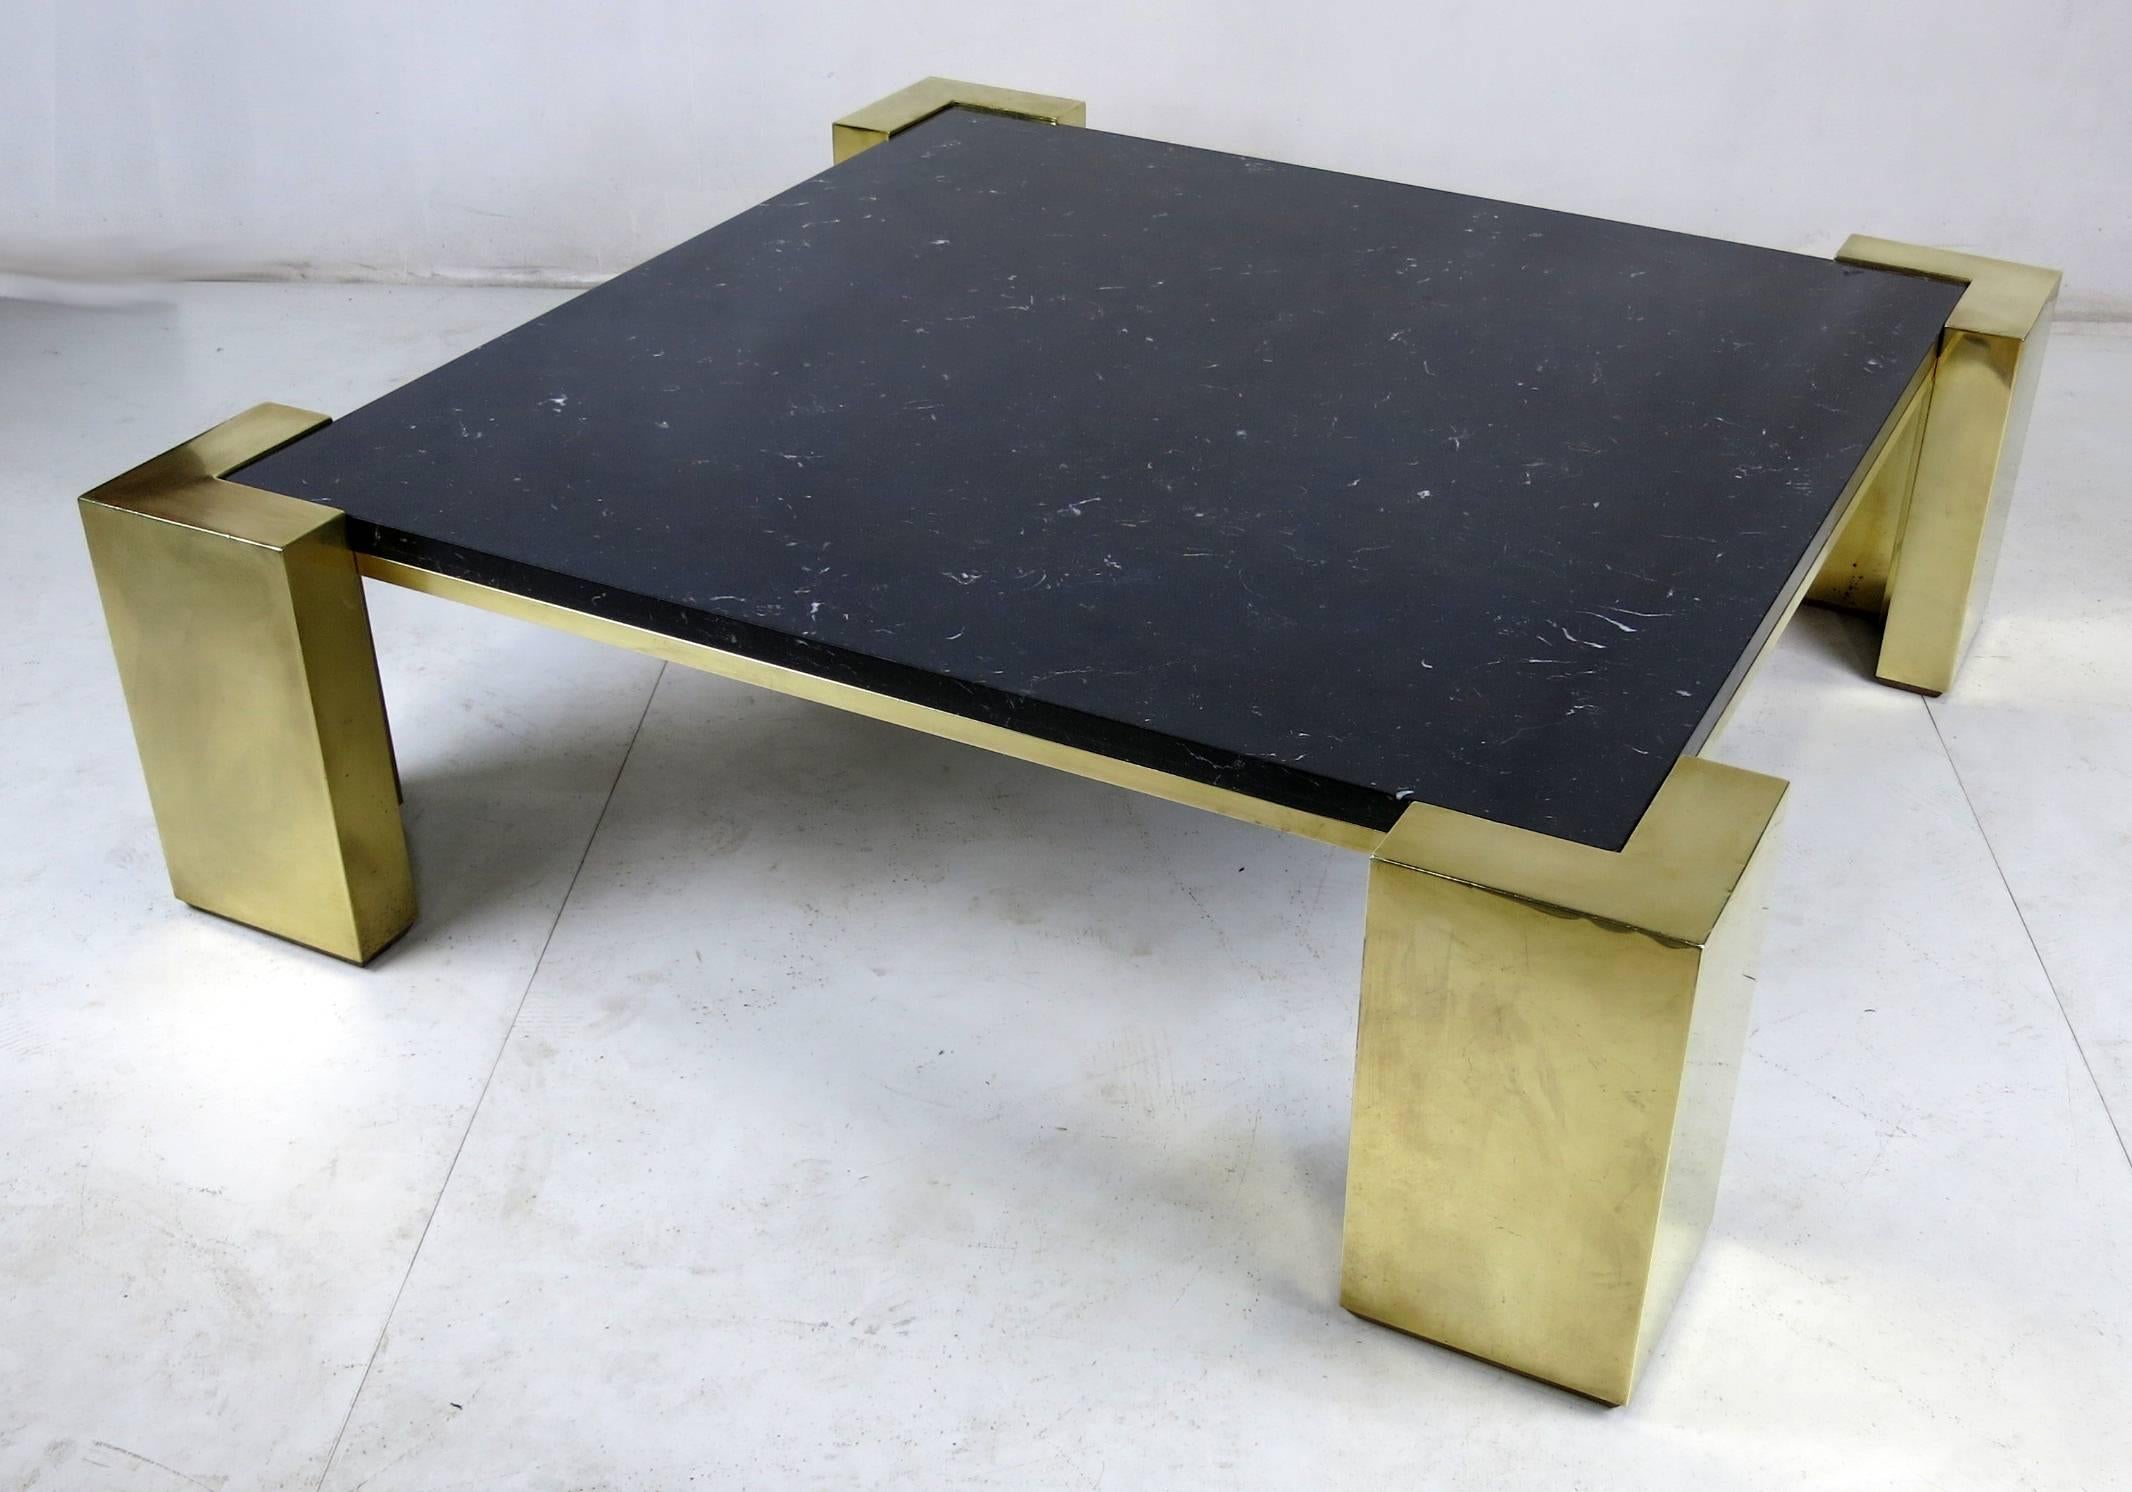 Large and dramatic scale coffee table with brass corners and frame with inset black marble top similar in style to those by Karl Springer.  Top quality materials and workmanship.  